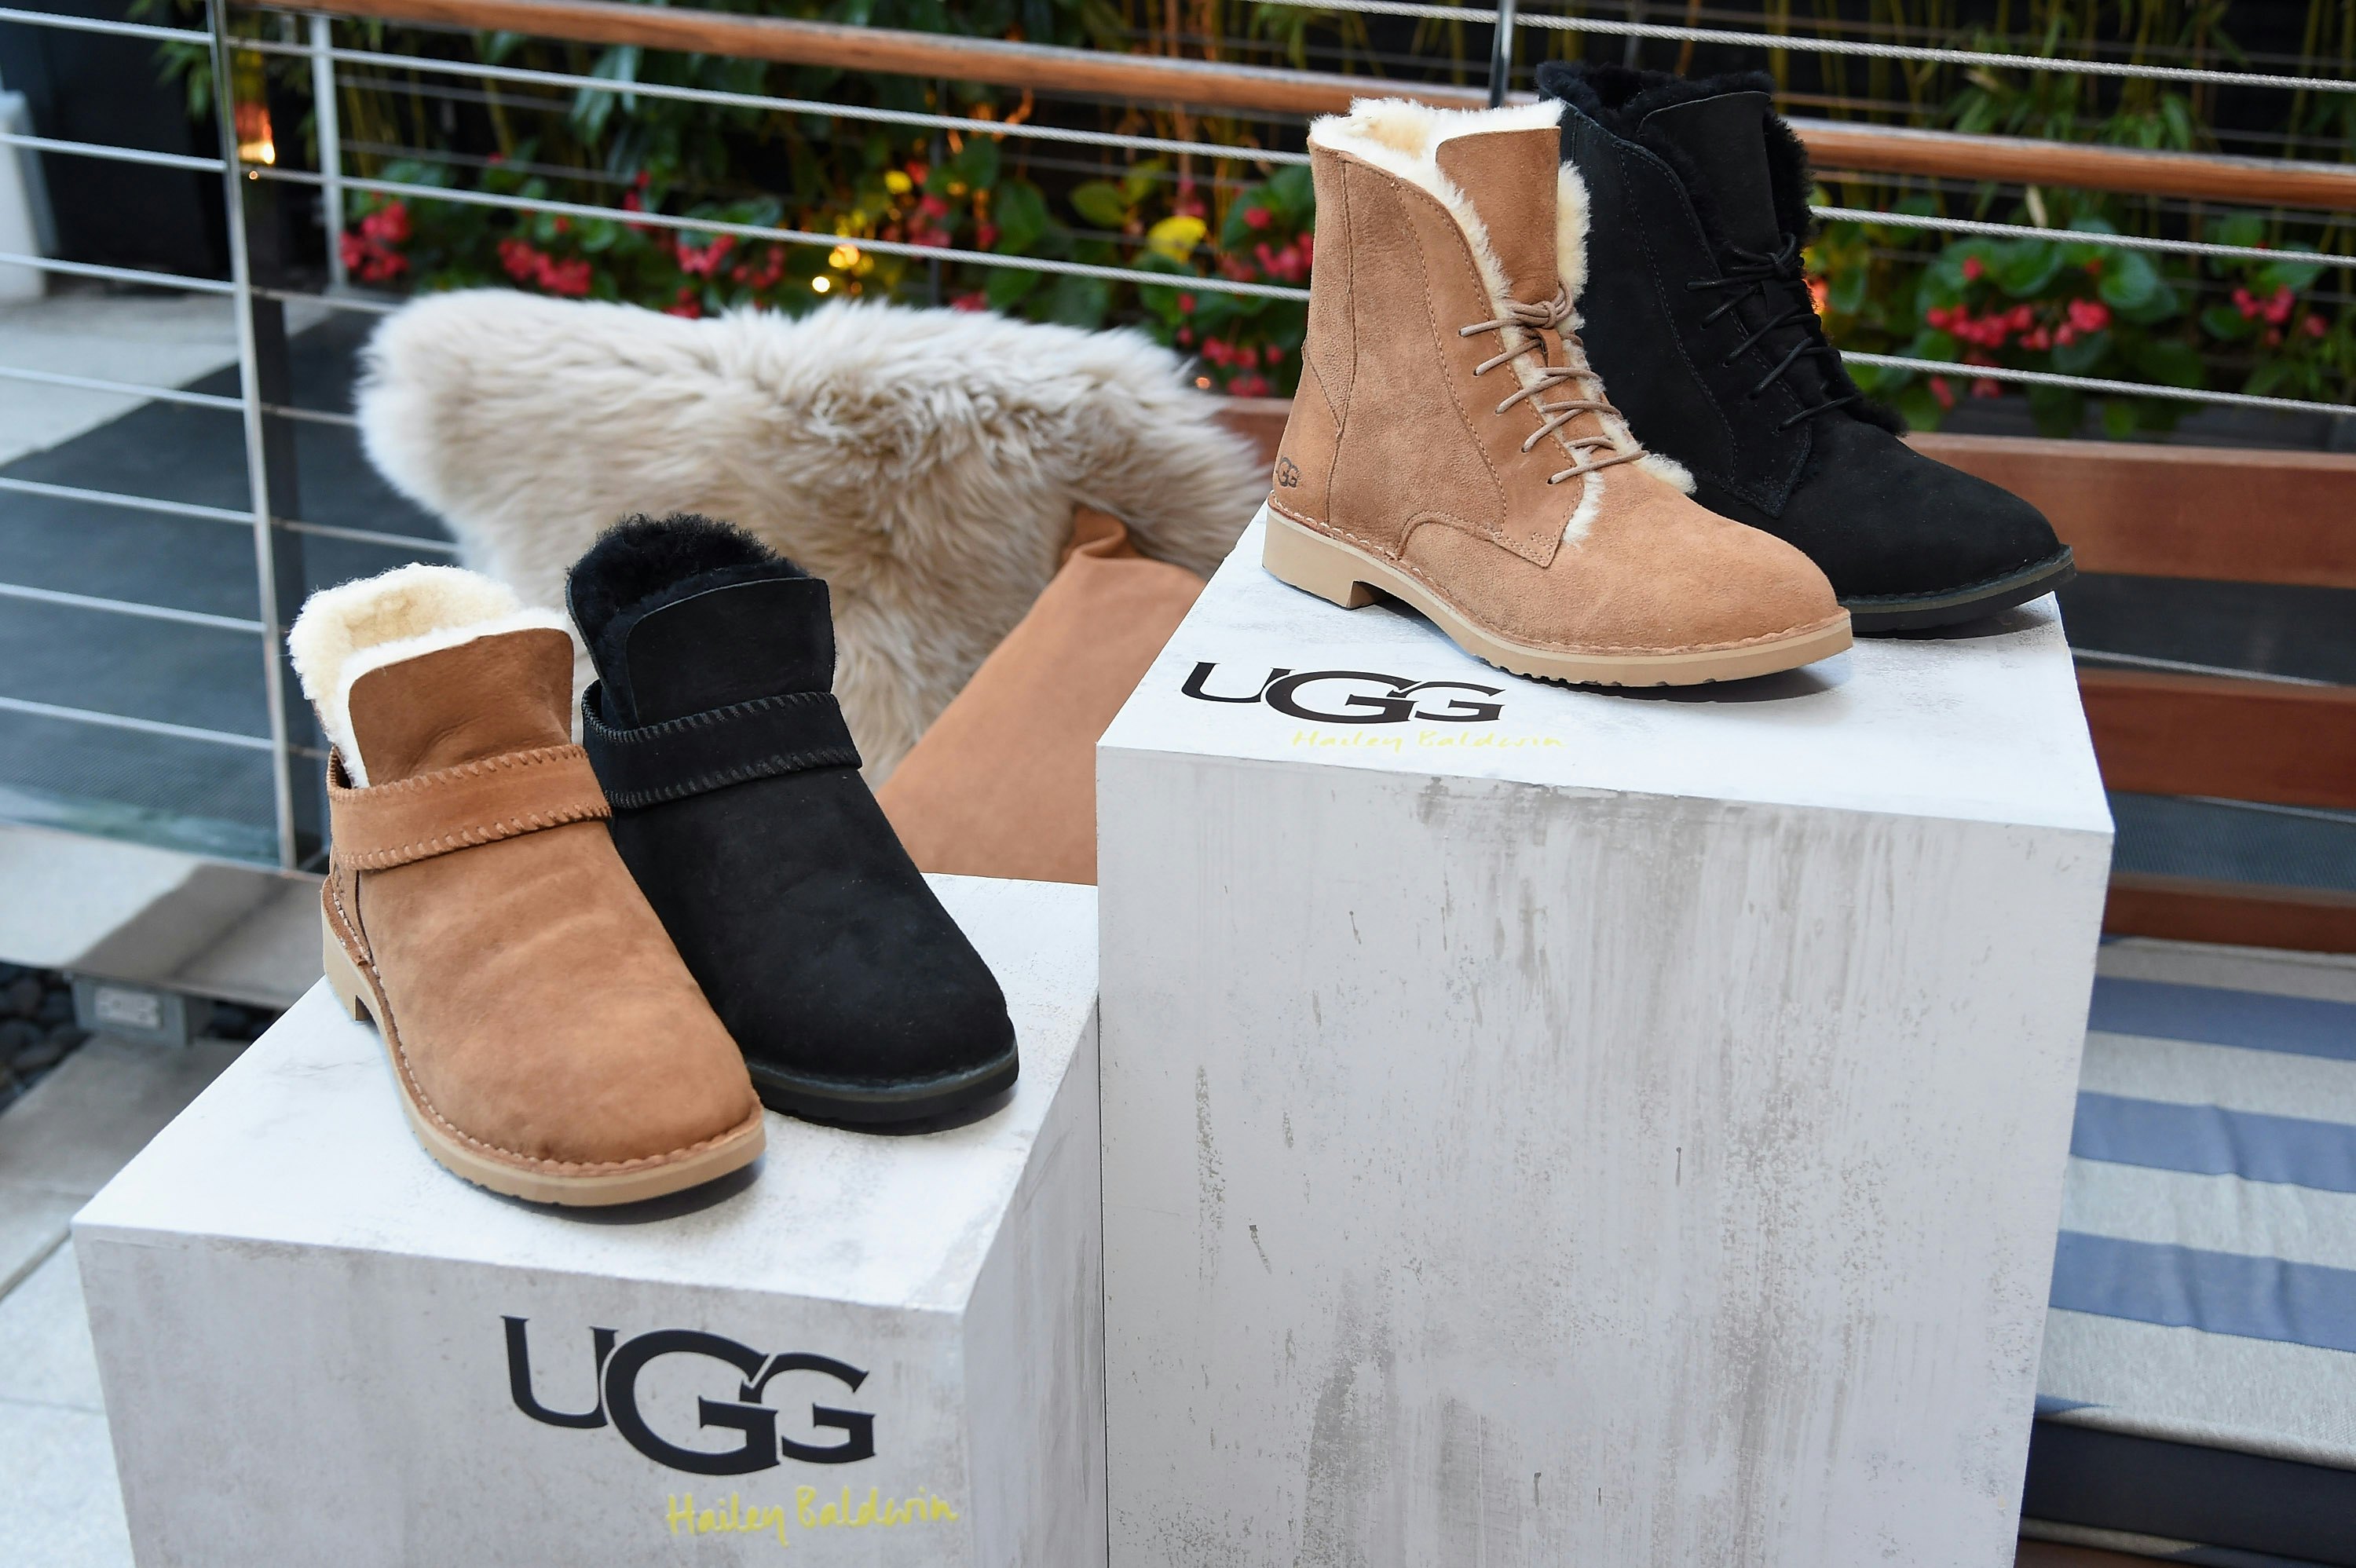 thigh high ugg boots with fur